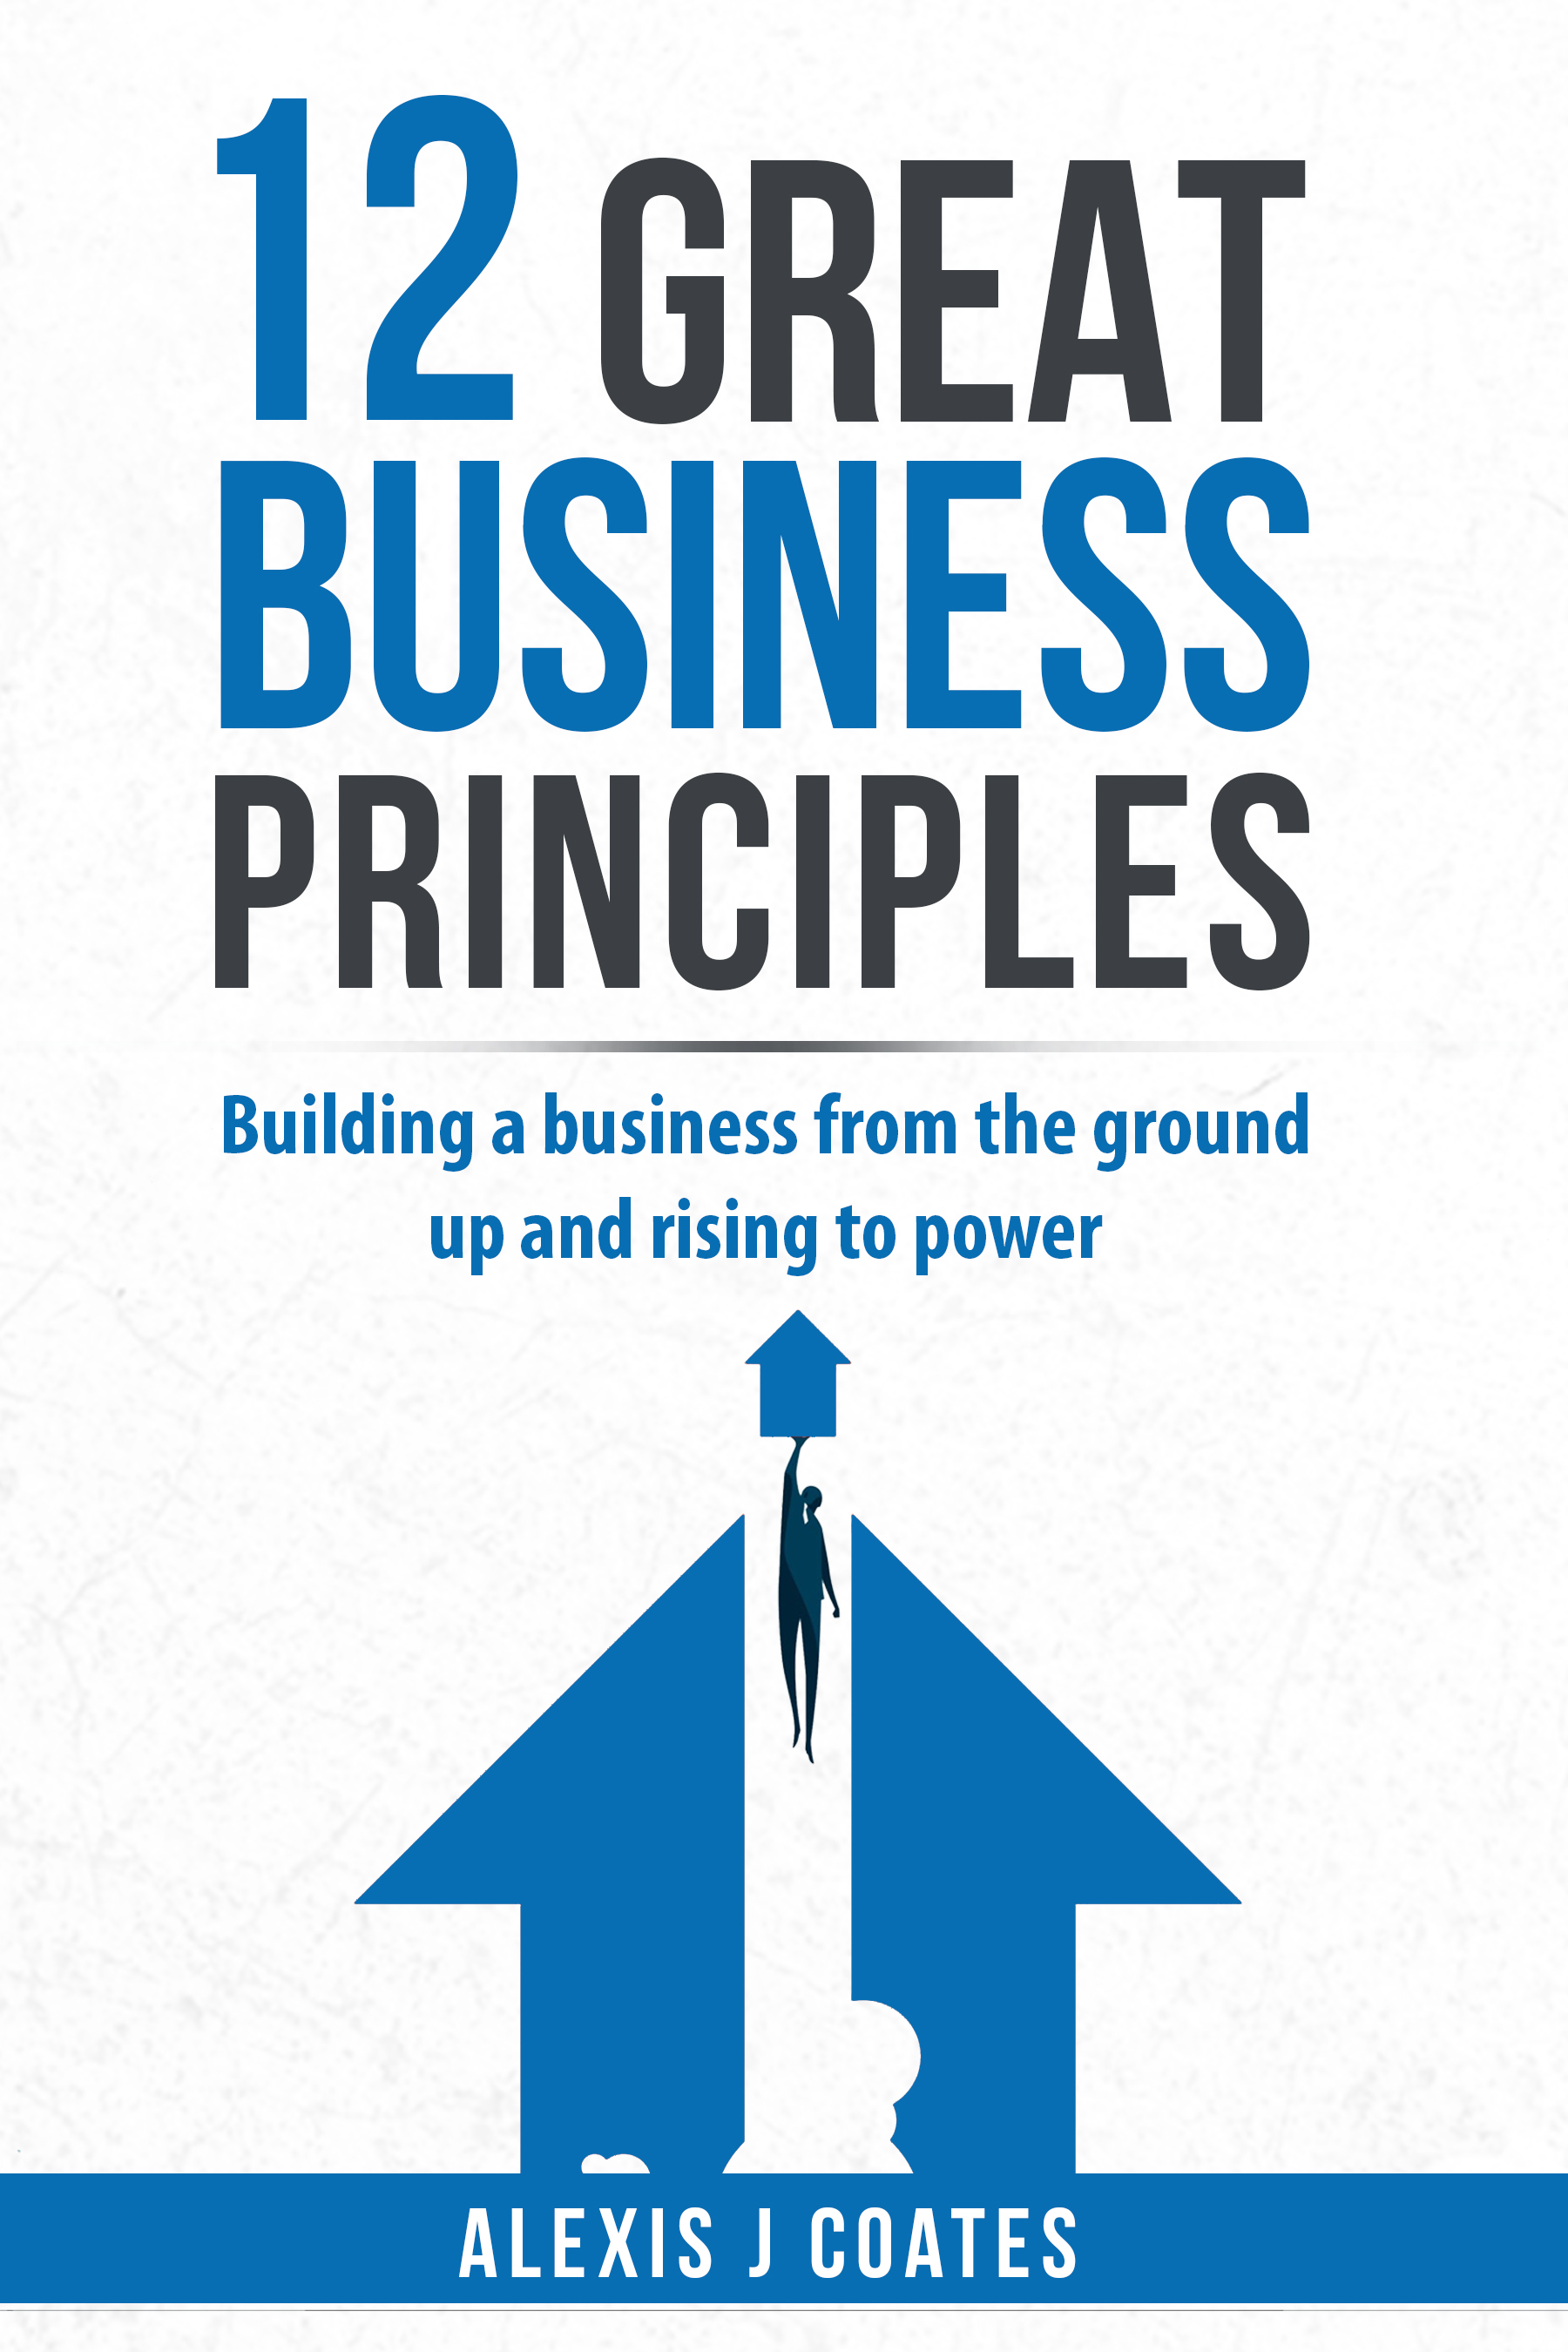 From 51 Business Essentials to 12 Great Business Principles, Alexis Coates New Book is a Must-Have for Business Owners and Entrepreneurs